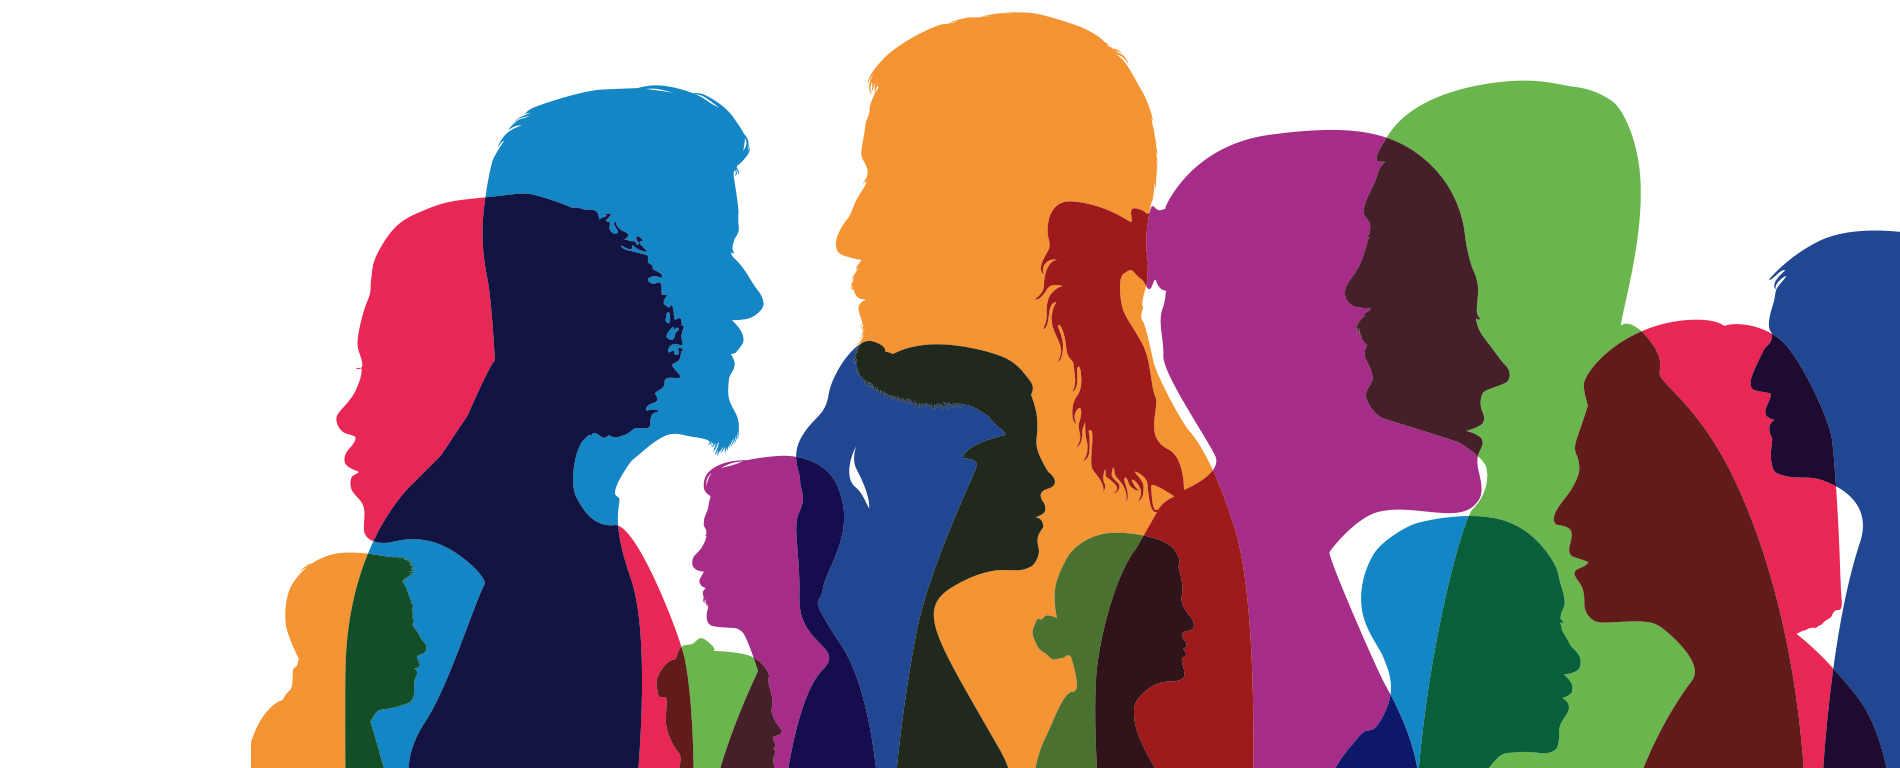 Colorful collage of several people in silhouette